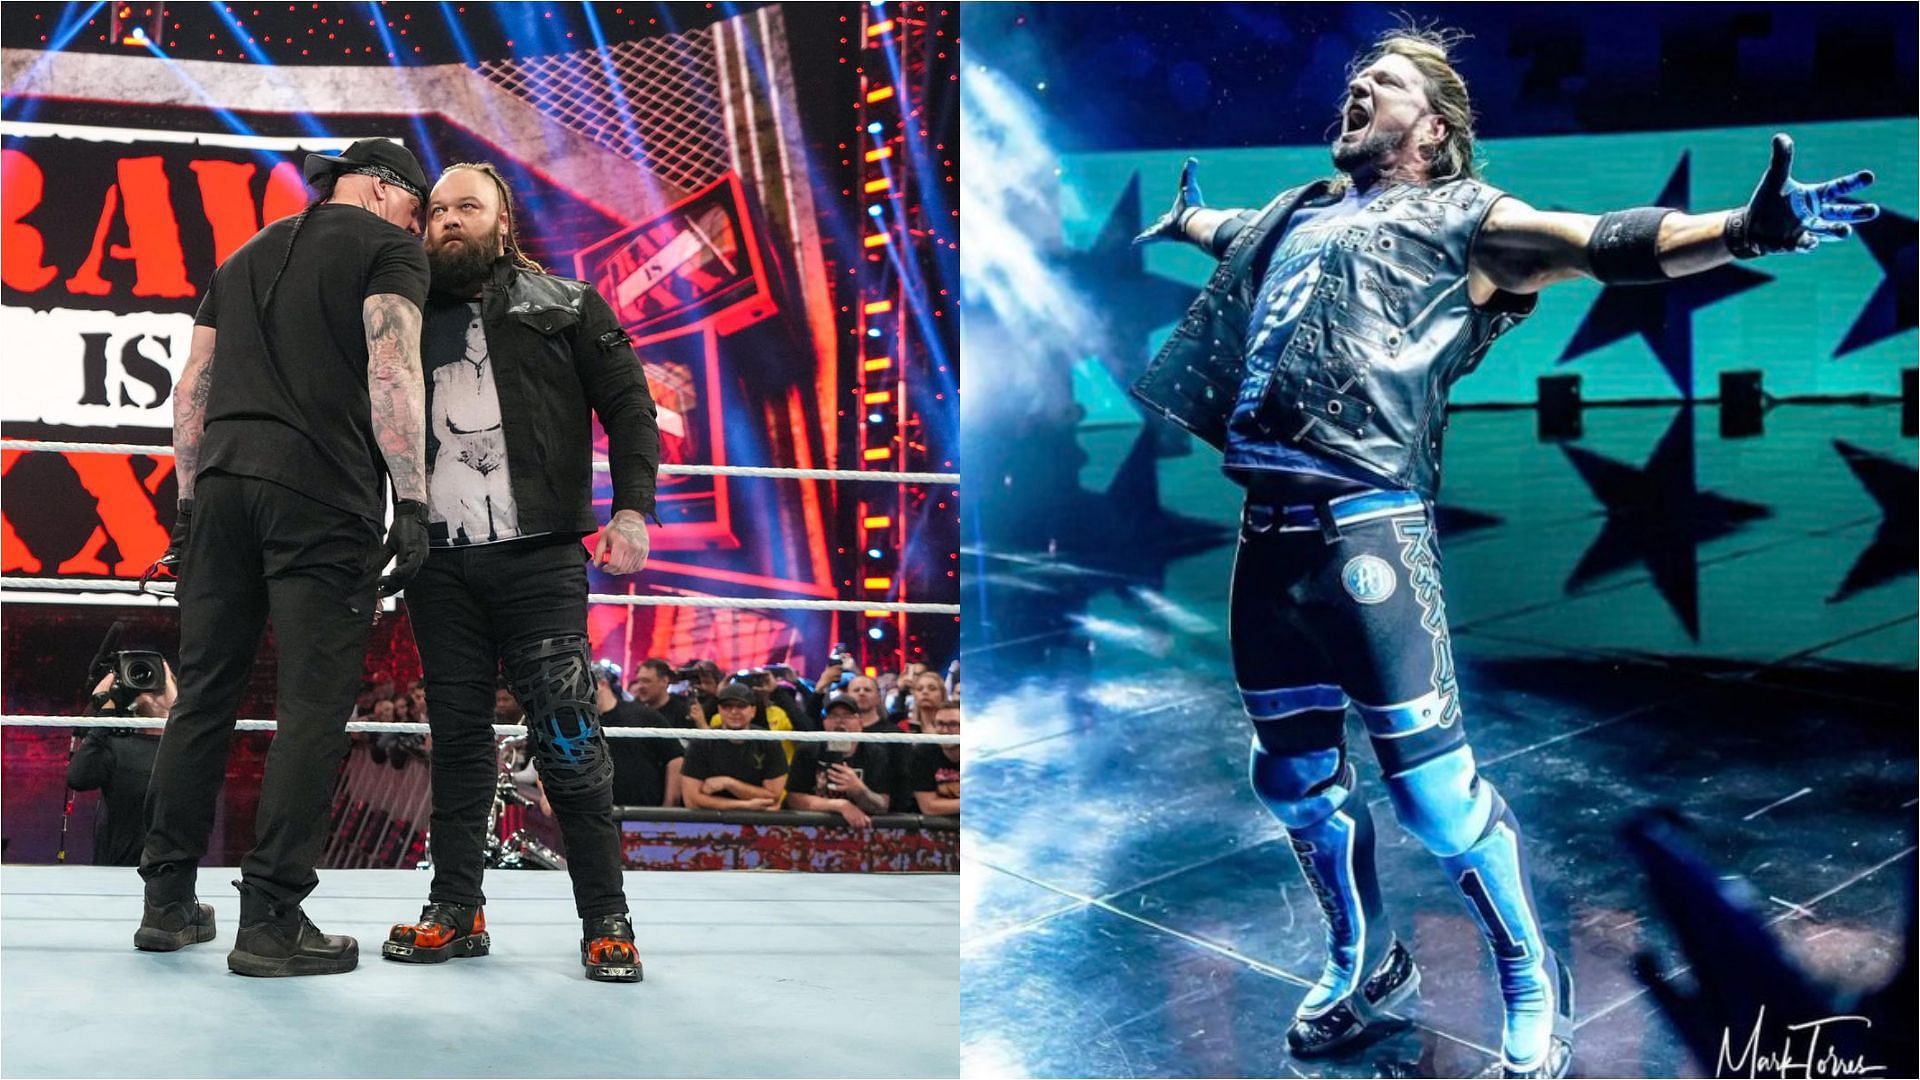 Could The Phenom&#039;s final opponent give Wyatt a fiendishly phenomenal match?